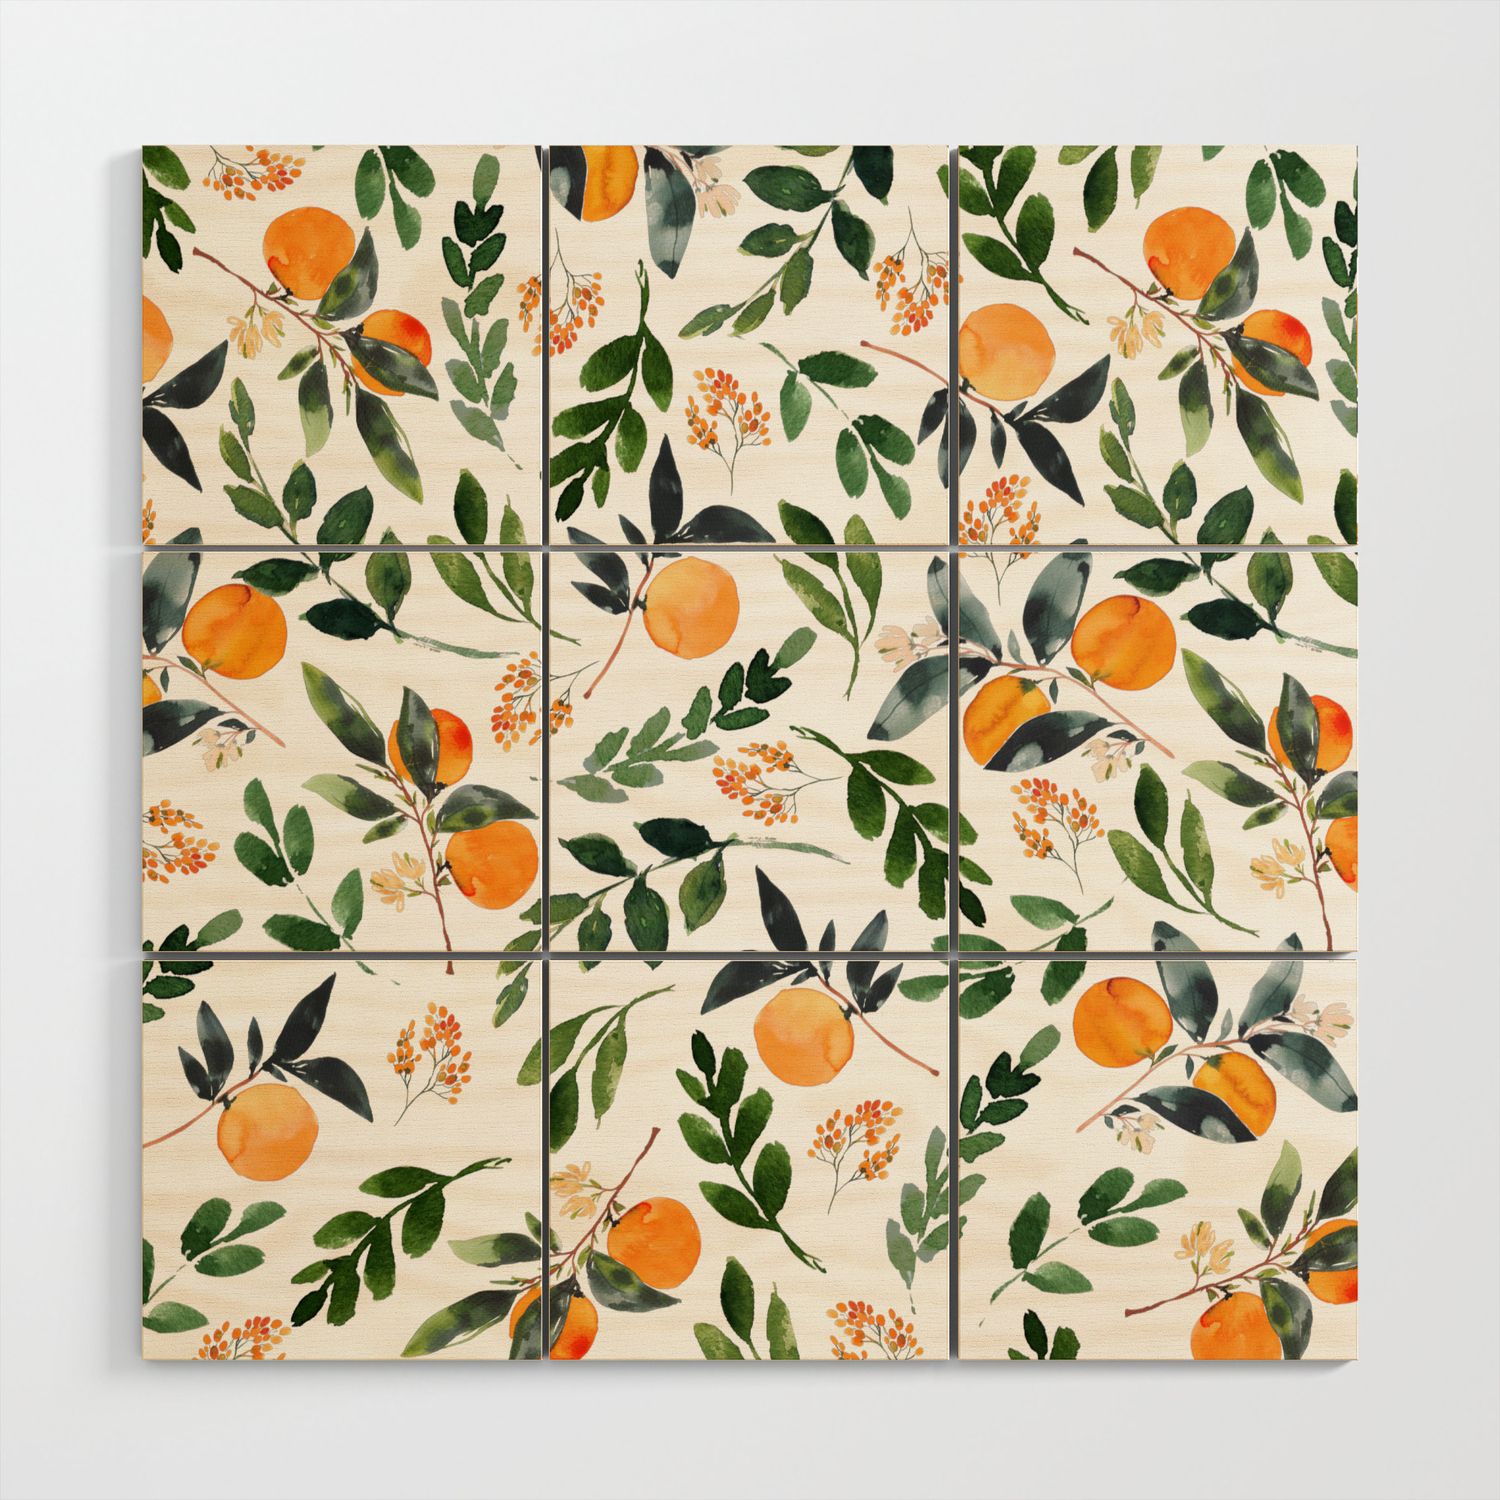 Orange Grove Wood Wall Artlizzy Powers Design | Society6 Throughout Recent Orange Grove Wall Art (View 3 of 20)